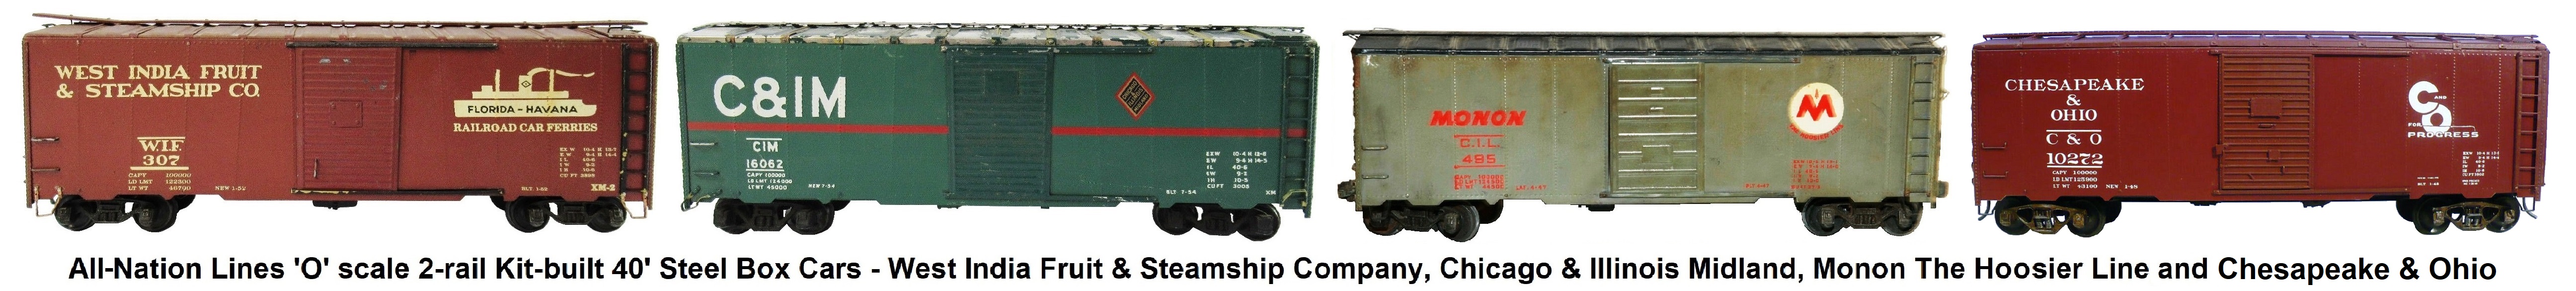 All-Nation 'O' scale 40' Steel Box Cars Kit-built into West India Fruit & Steamship Co., Chicago & Illinois Midland, Monon The Hoosier Line and Northern Pacific Railway Liveries